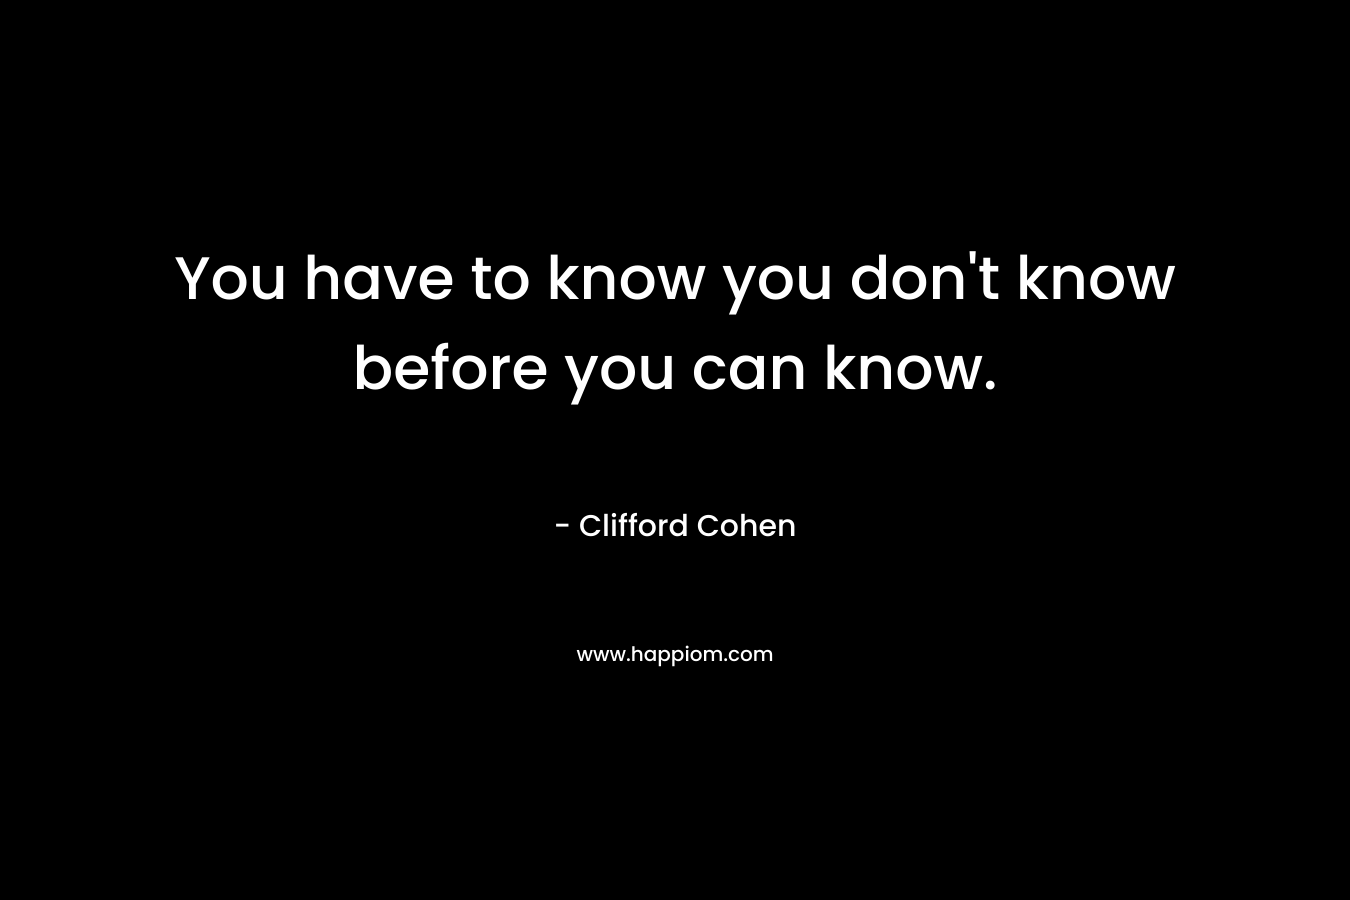 You have to know you don’t know before you can know. – Clifford Cohen